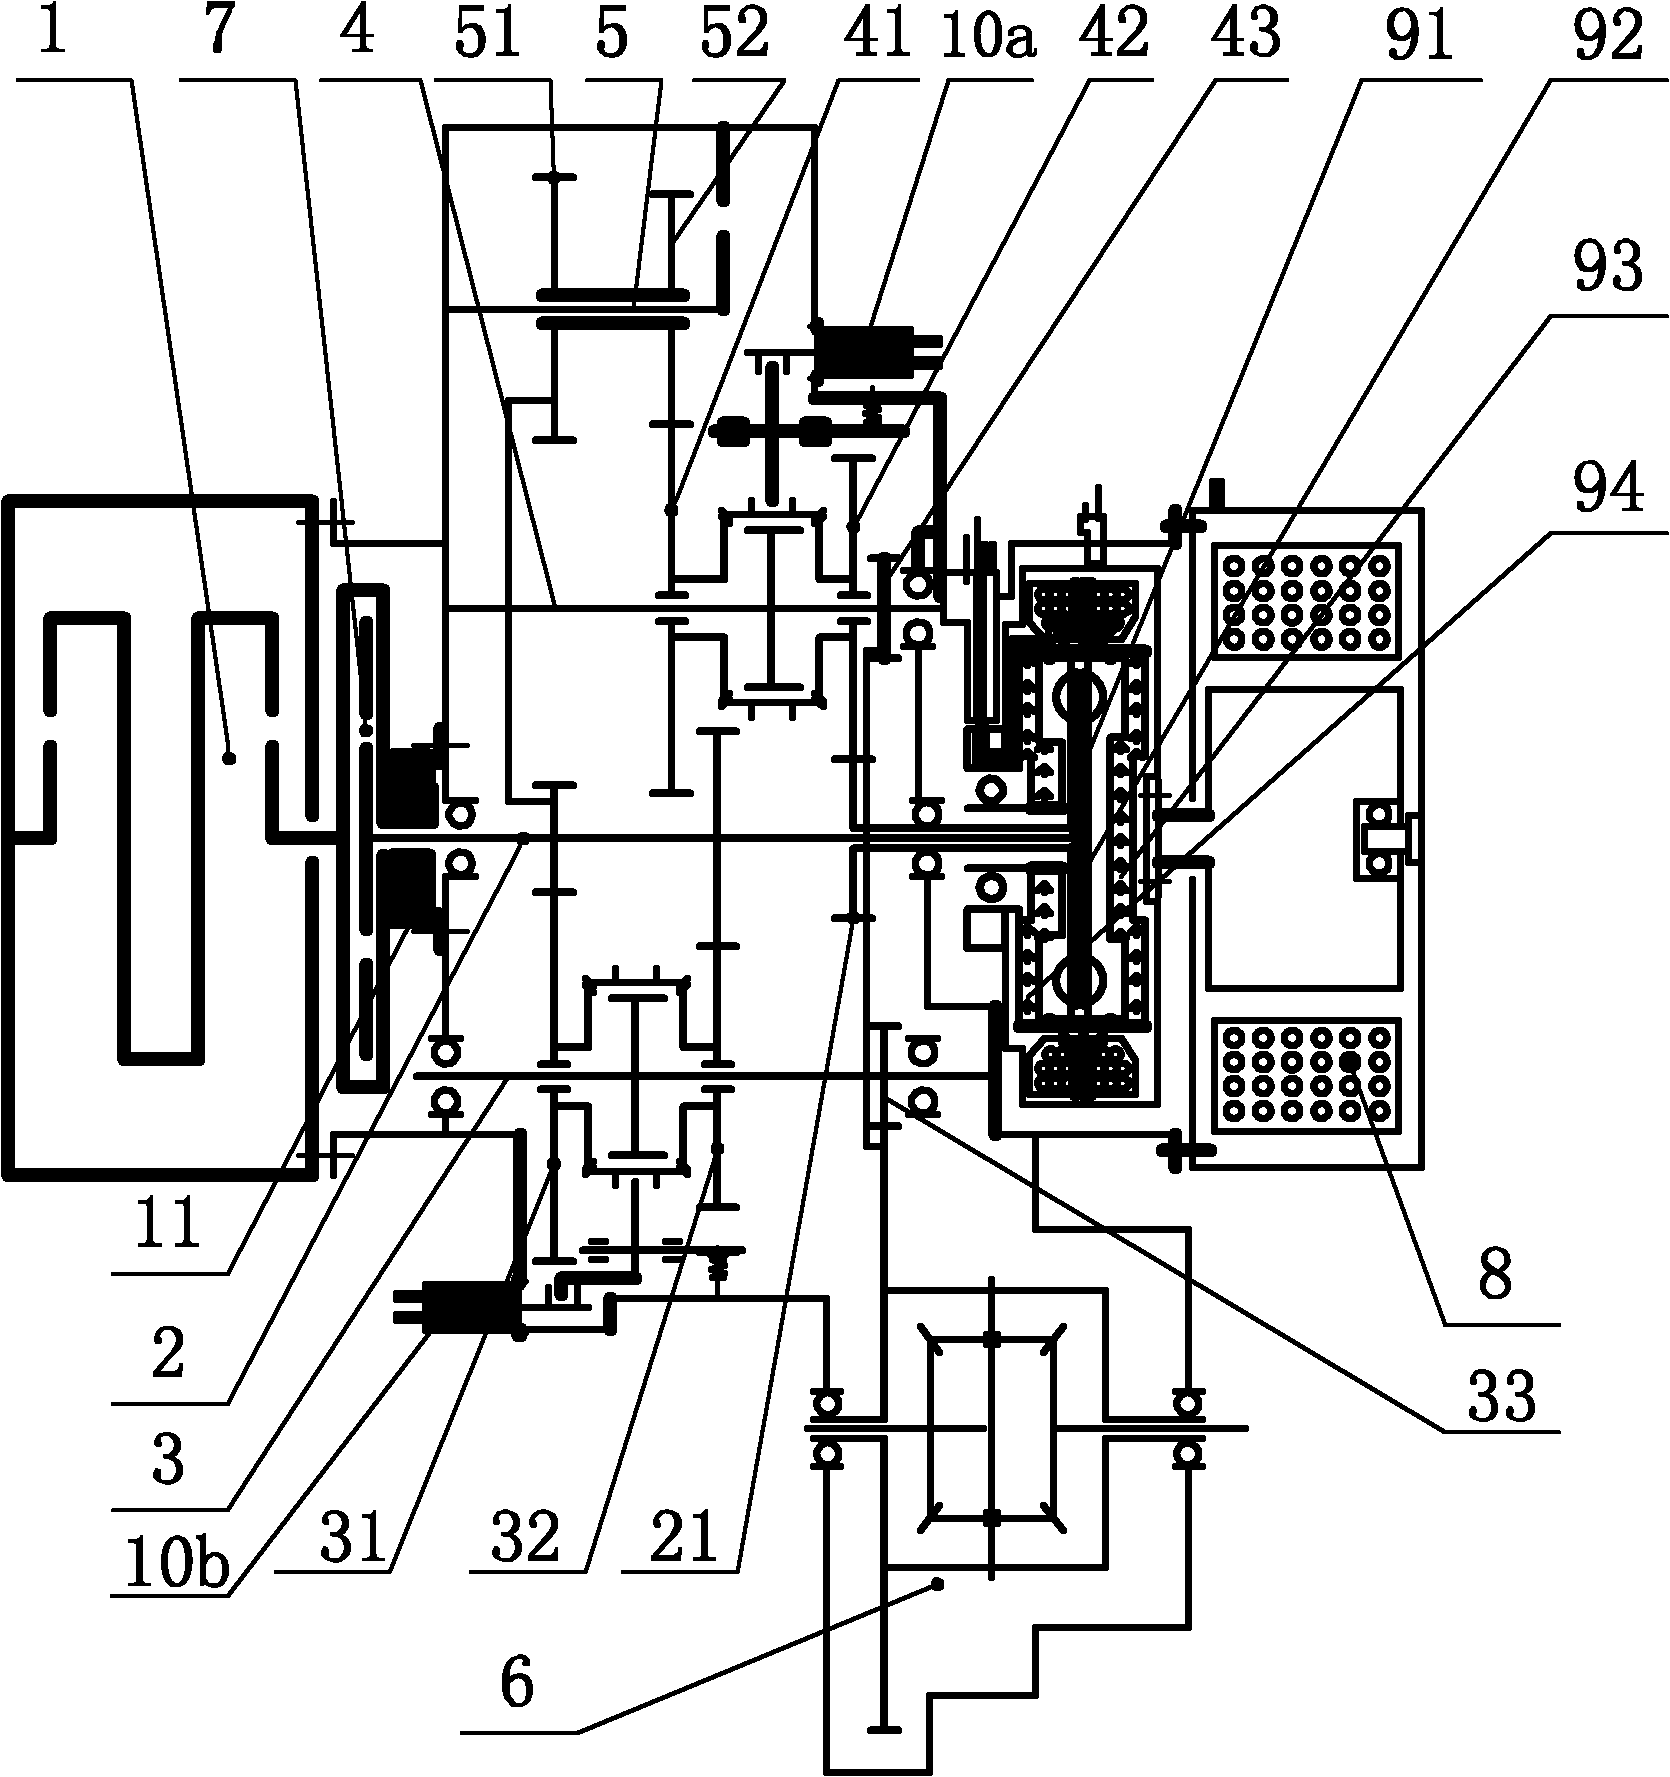 Three-gear magnetic particle type double-clutch speed changer for hybrid power